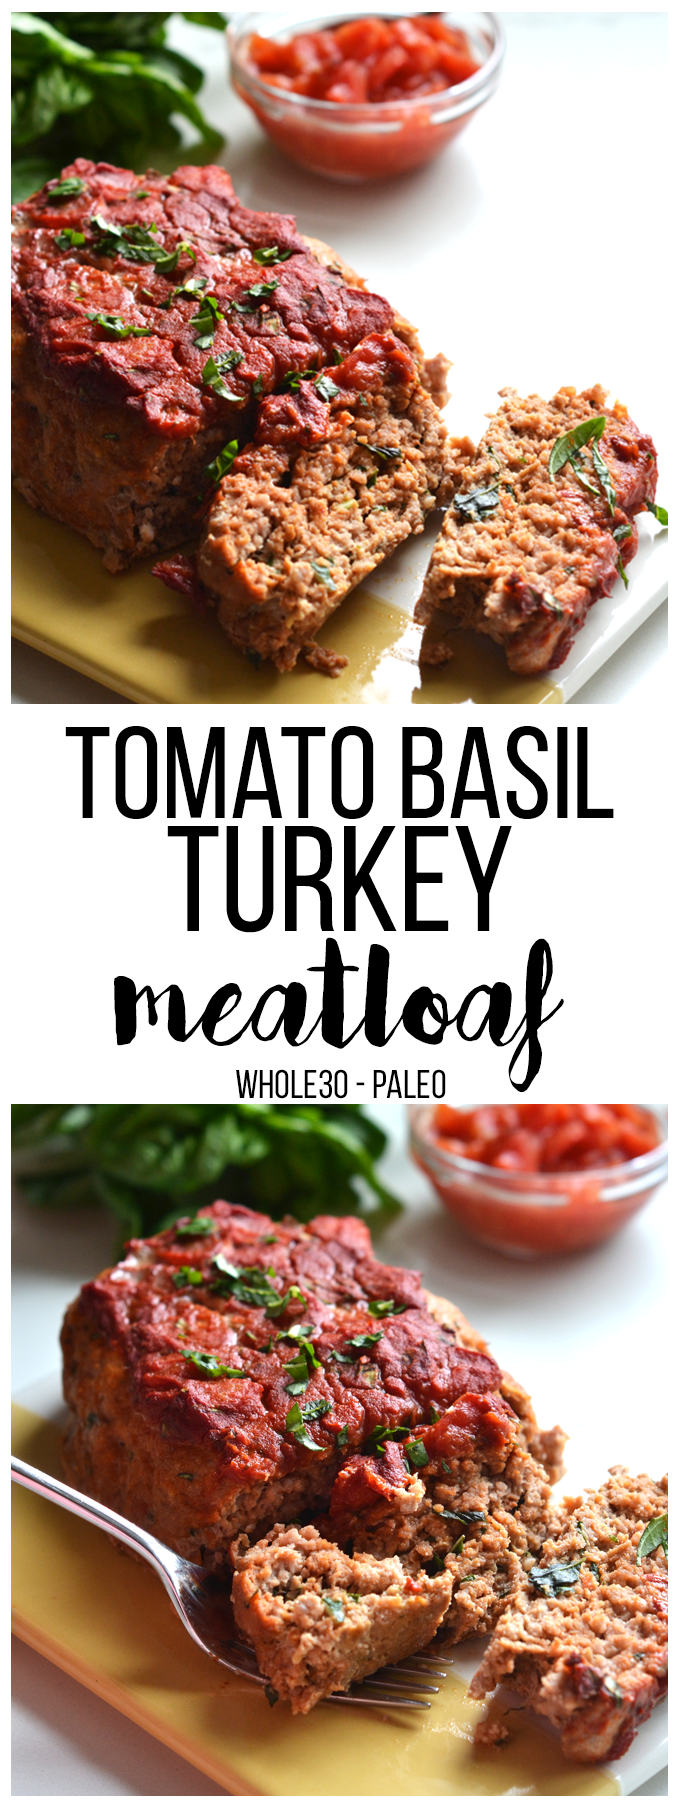 This Tomato Basil Turkey Meatloaf recipe is a perfect whole30 & paleo option that is super easy to throw together for a weeknight